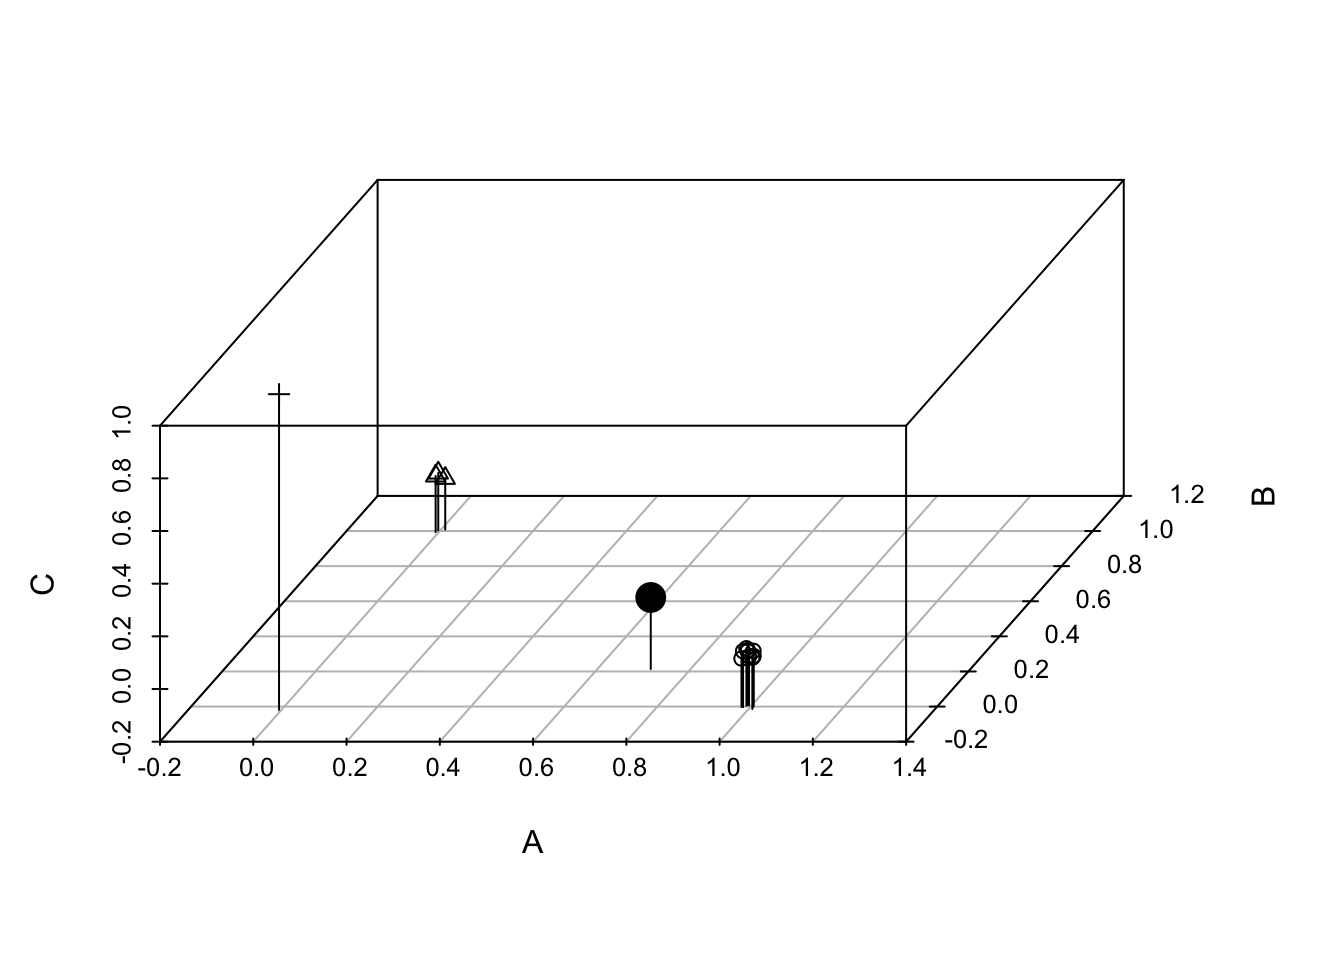 Each of 14 individuals in a three species community, plotted in 'compsition space'. The large black dot is the multivariate mean, or centroid, which is the center of gravity in this composition space. Simpson's diversity is the variance of species composition of individuals (Lande 1996).